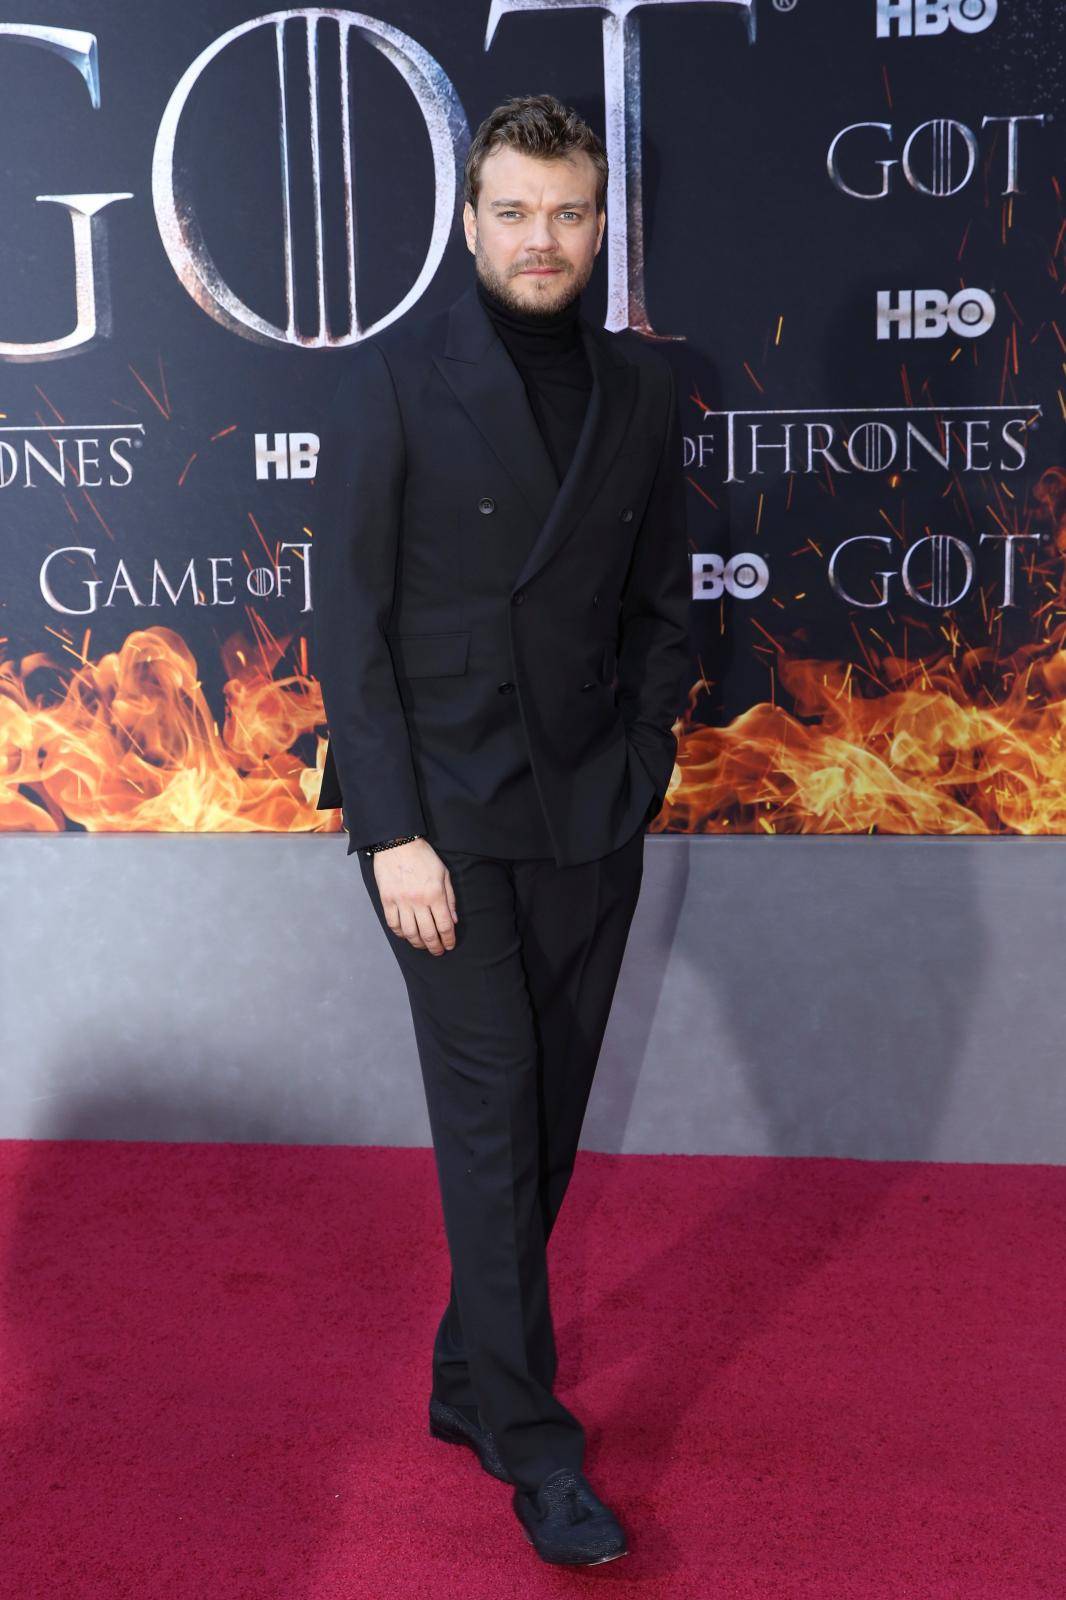 Pilou Asbaek arrives for the premiere of the final season of "Game of Thrones" at Radio City Music Hall in New York